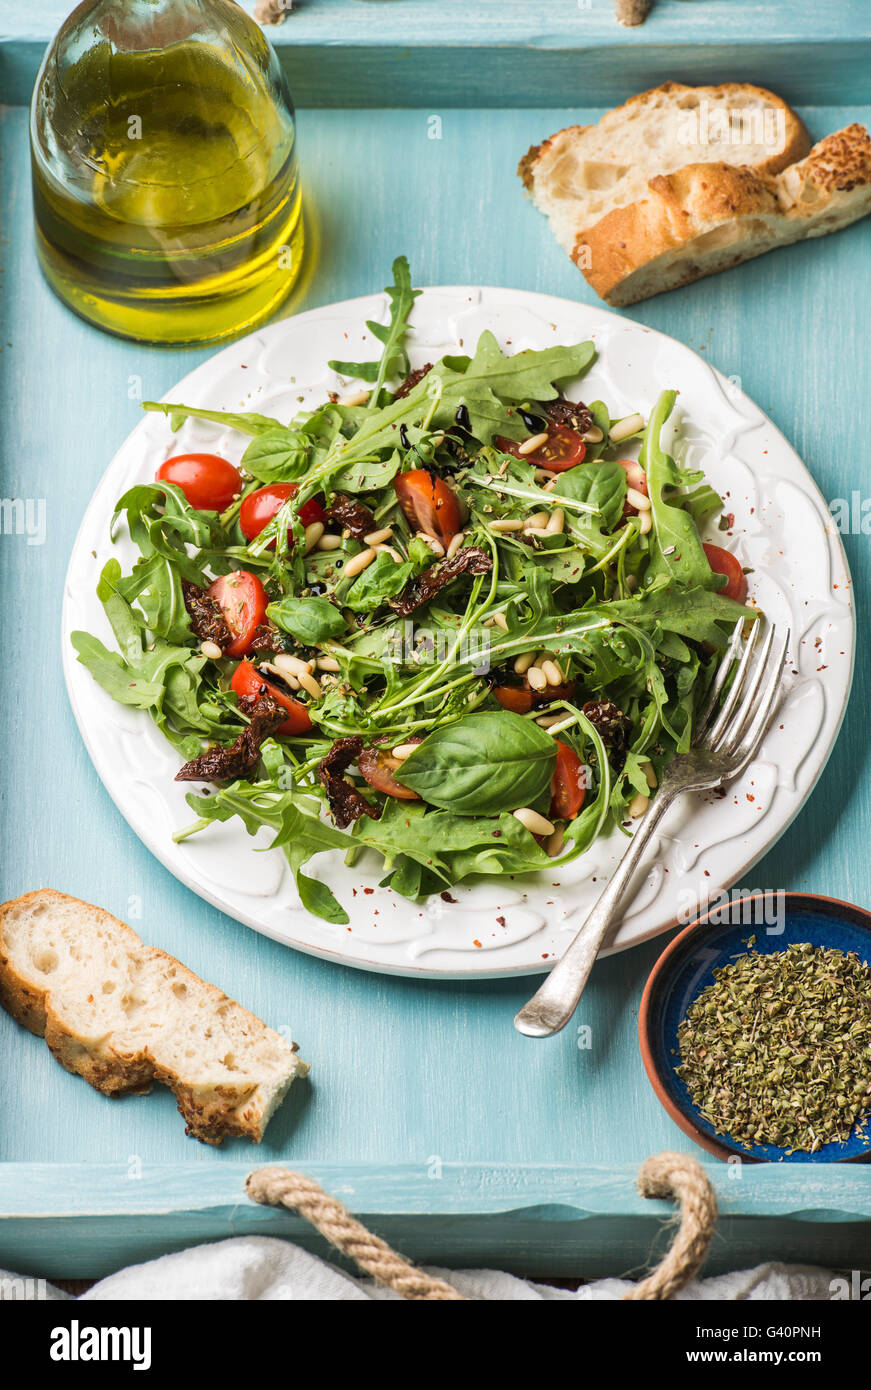 Salad with arugula, cherry tomatoes, pine nuts and herbs on white ceramic plate over blue wood background, selective focus Stock Photo